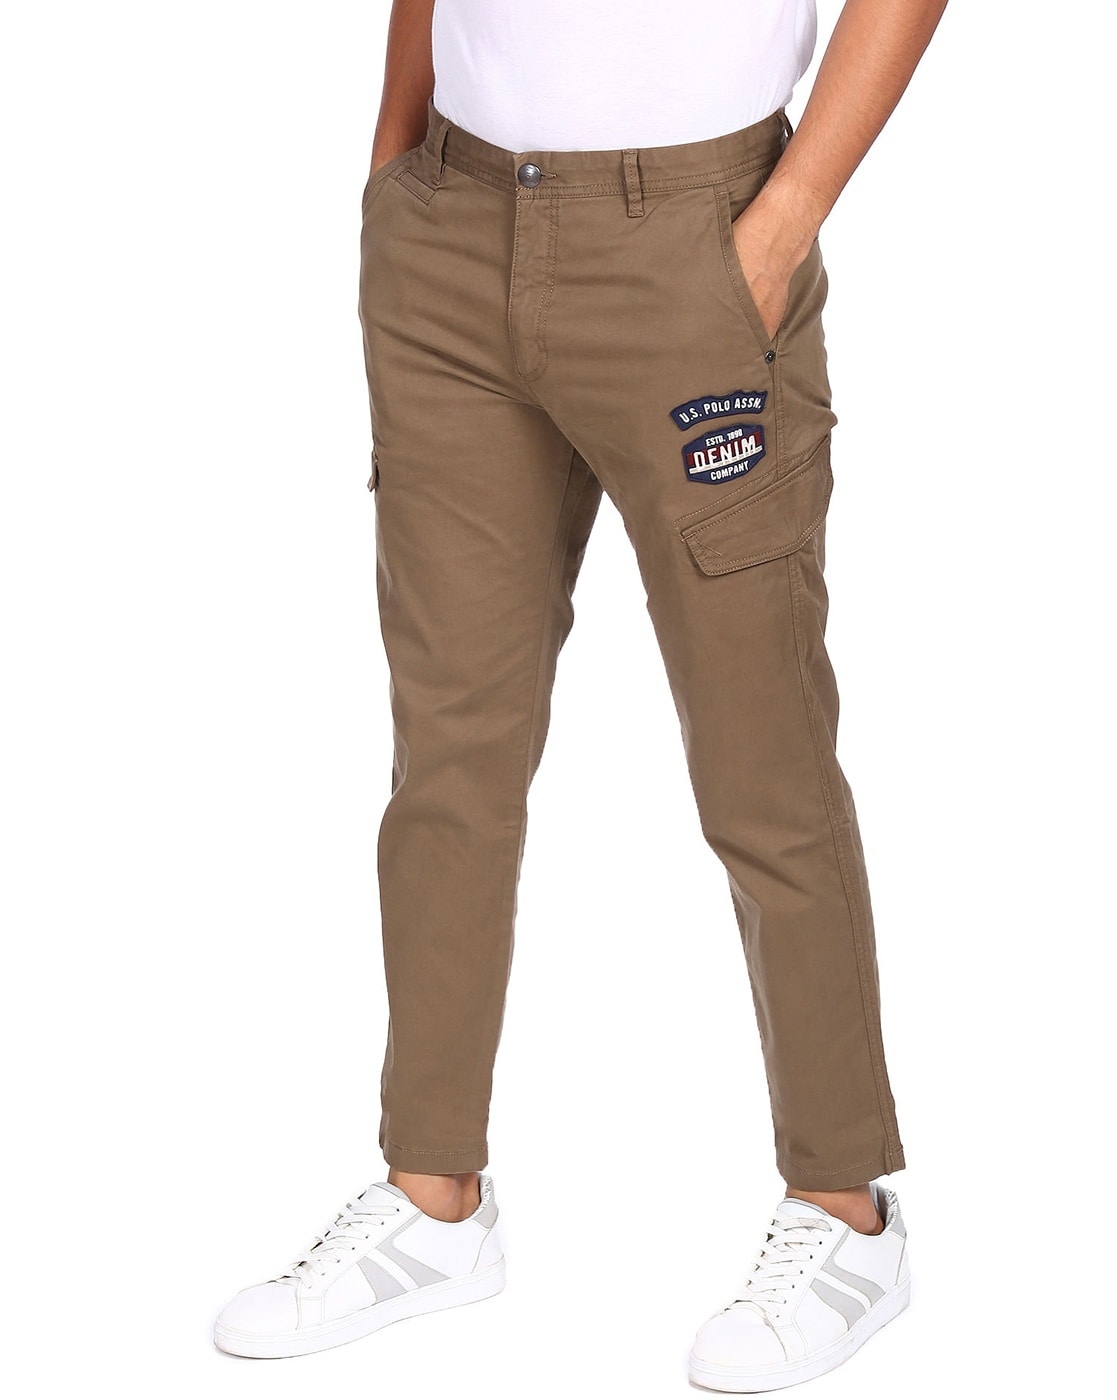 U.S. Polo Assn. Kids Brown Solid Cargo Pants